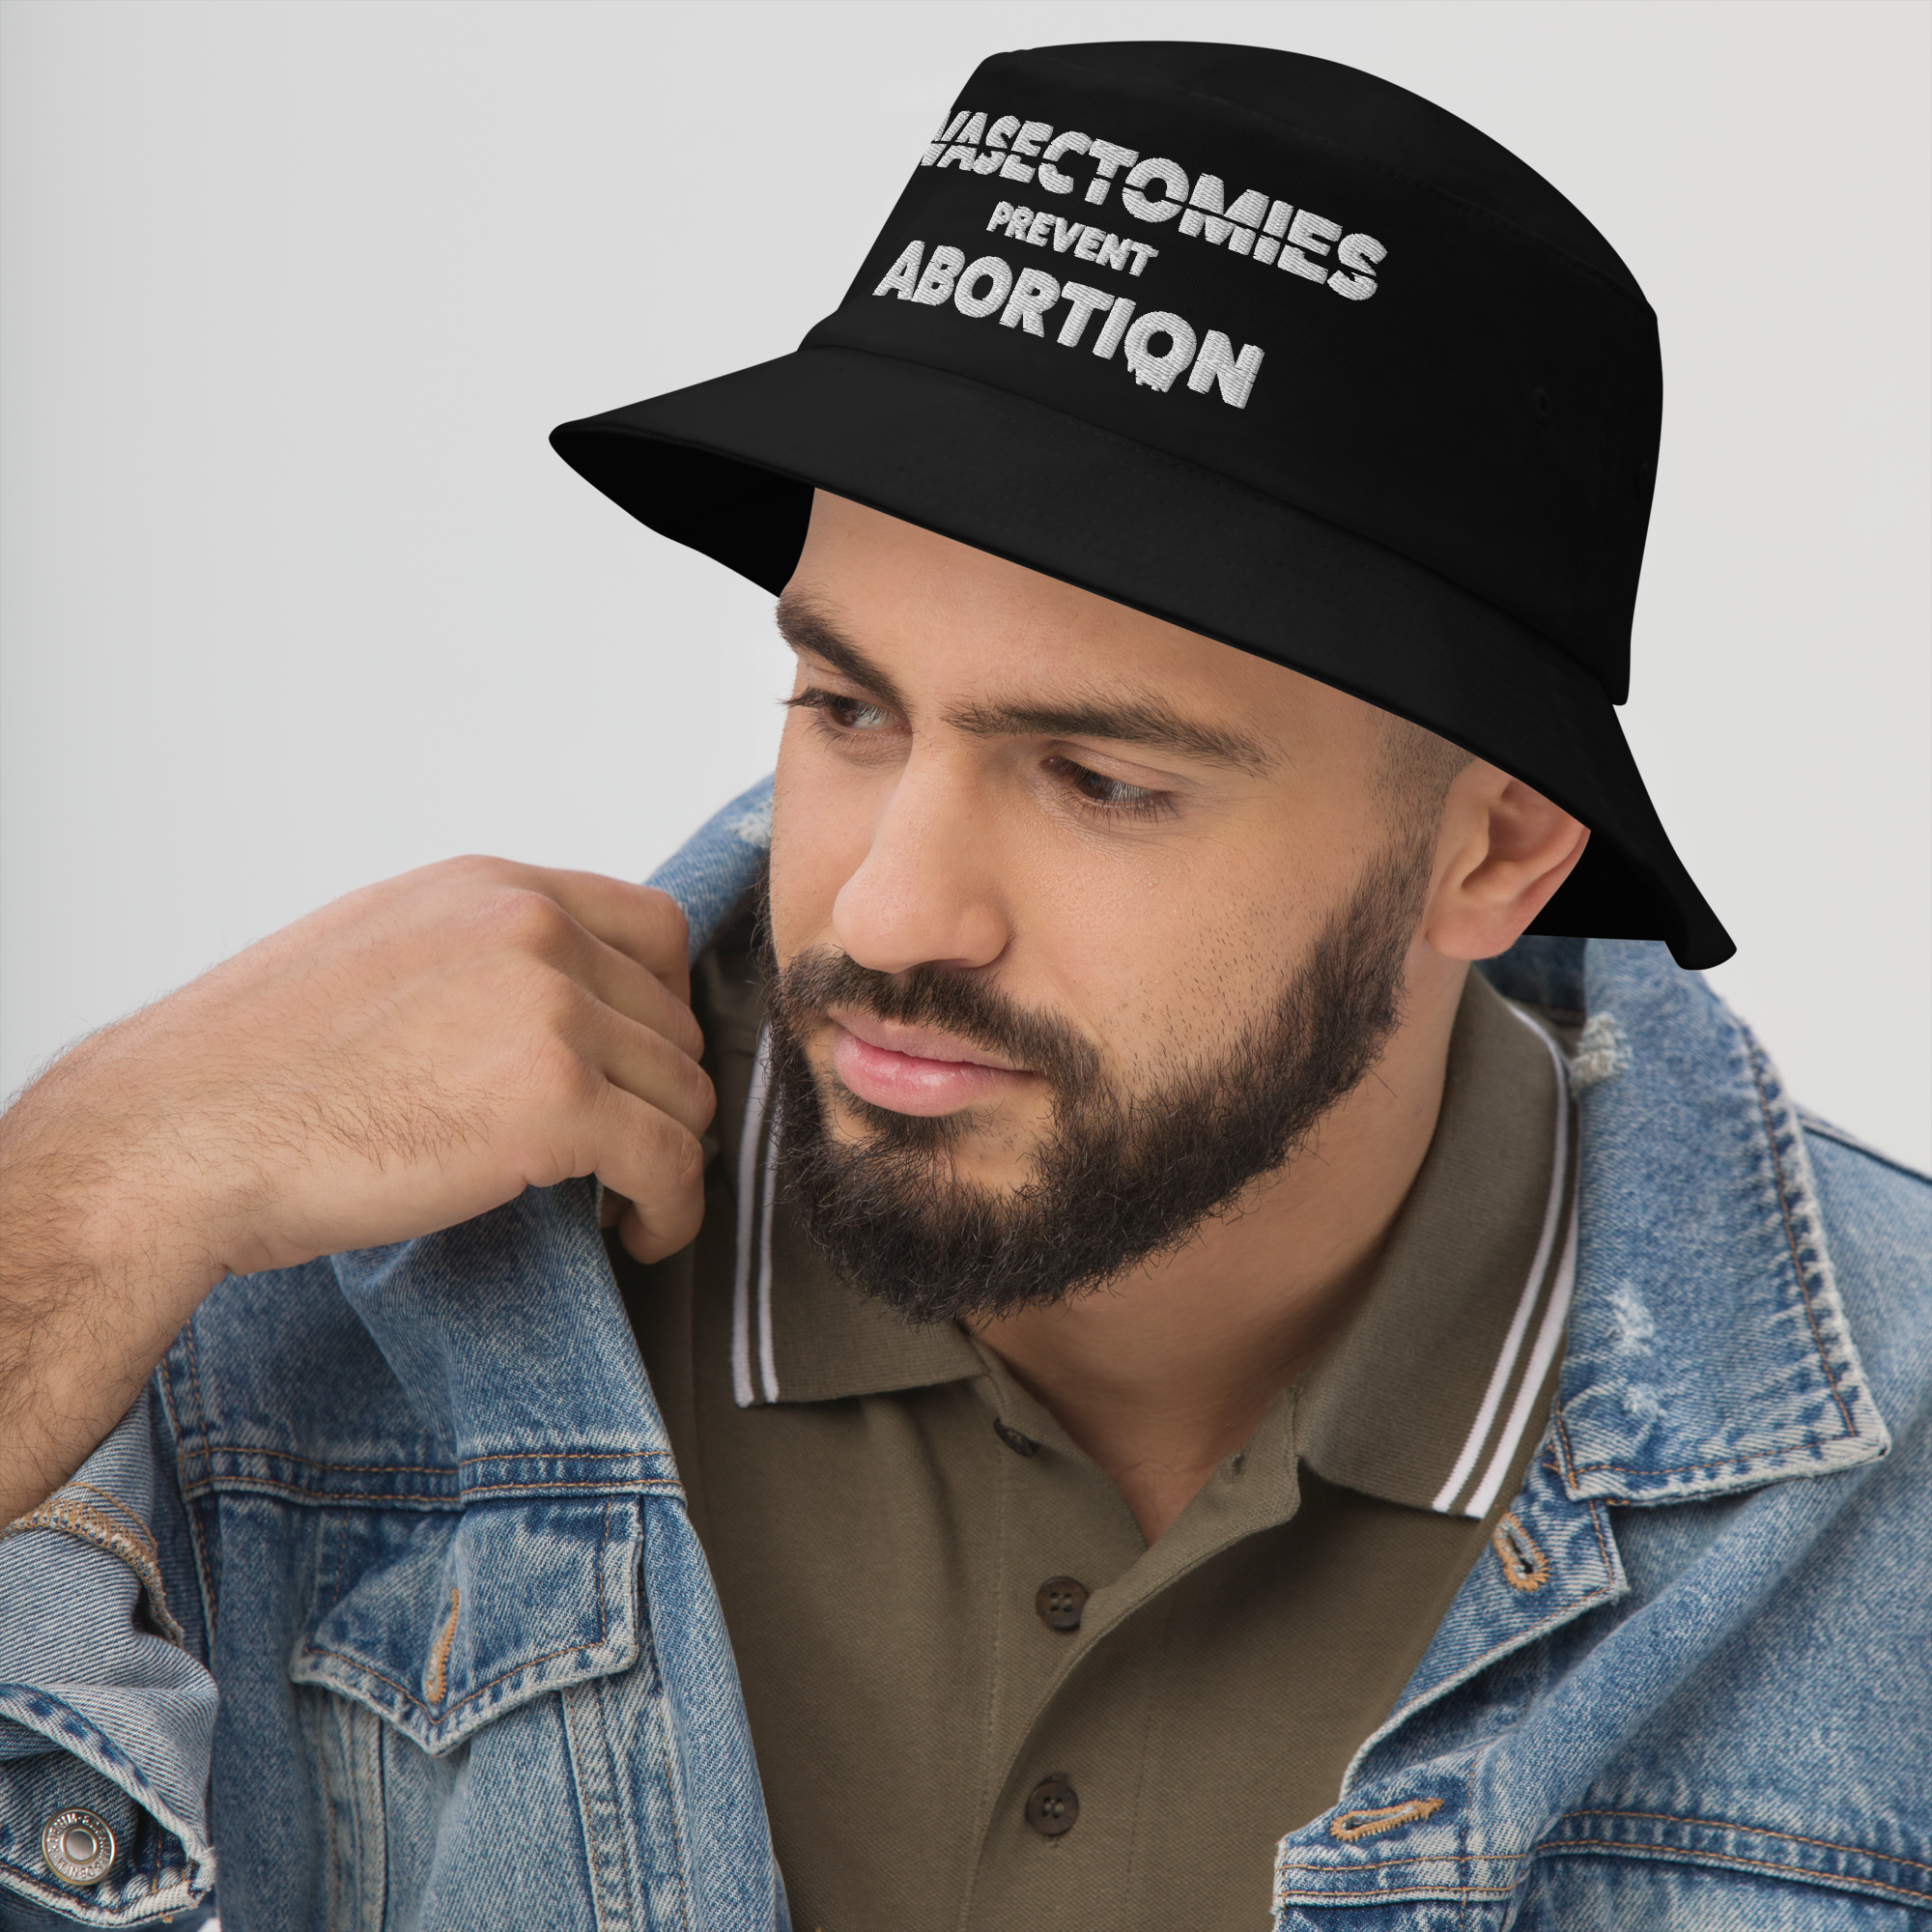 Vasectomies Prevent Abortion Embroidered Bucket Hat